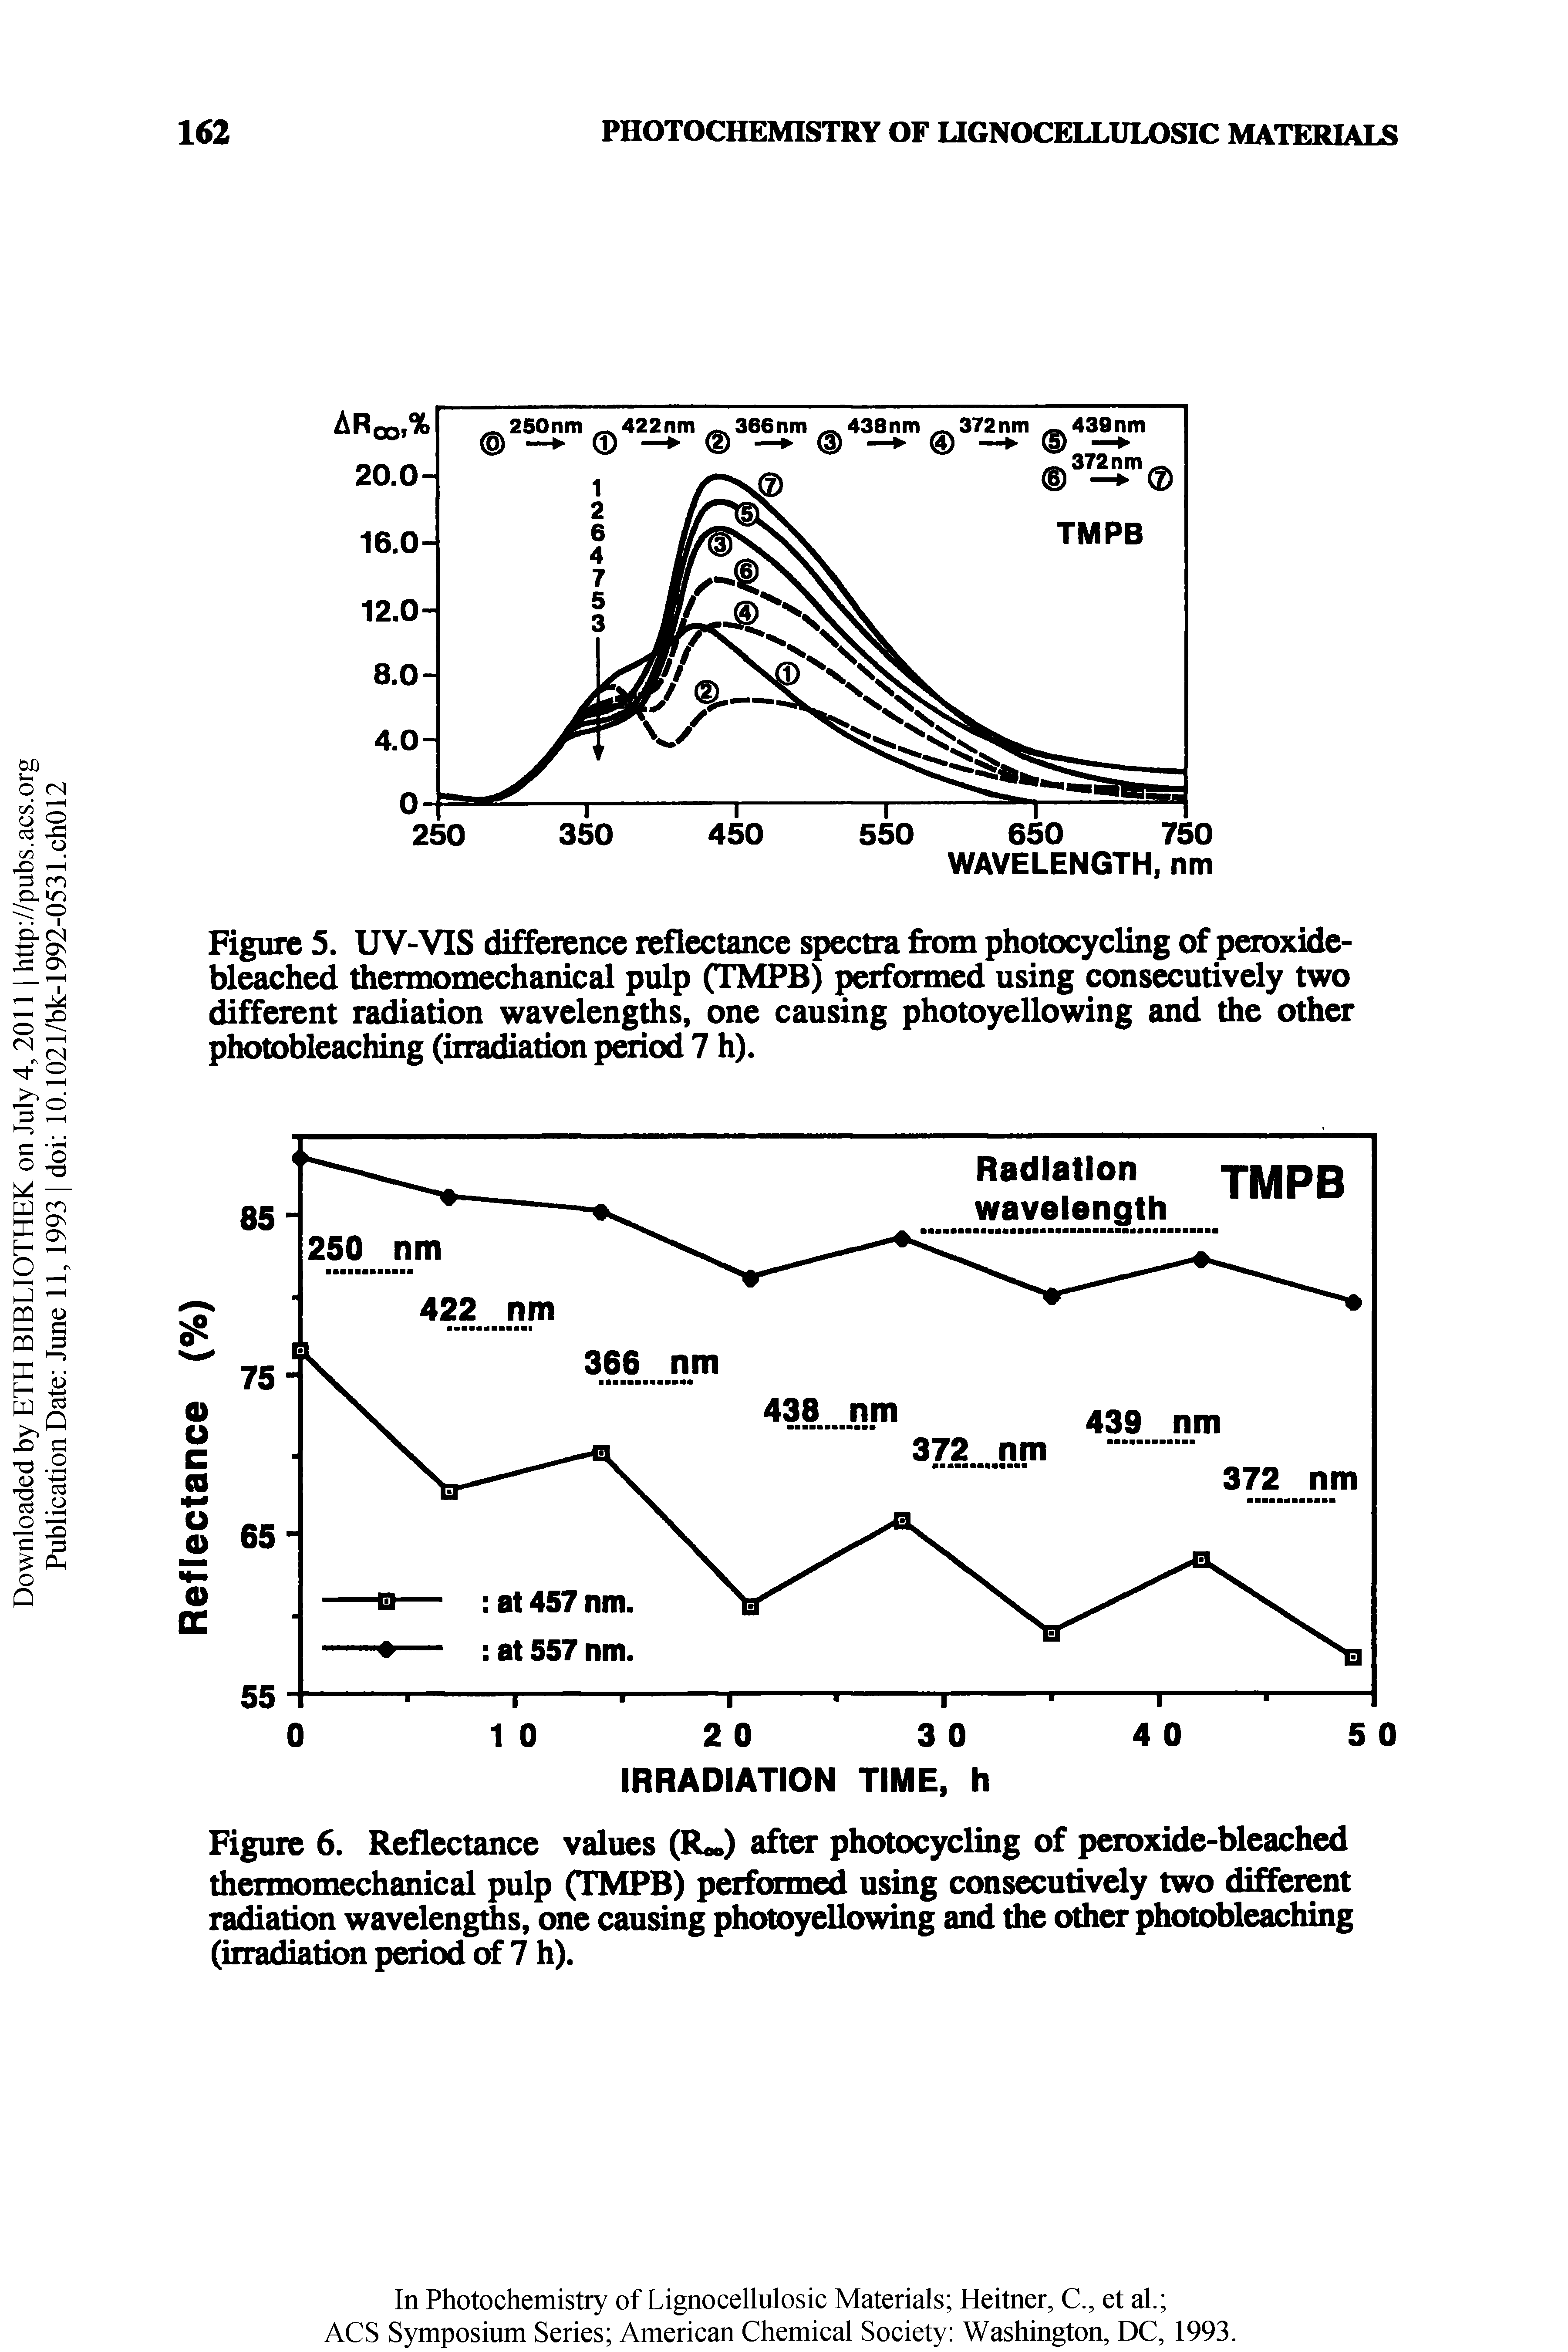 Figure 5. UV-VIS difference reflectance spectra from photocycling of peroxide-bleached thermomechanical pulp (TMPB) performed using consecutively two different radiation wavelengths, one causing photoyellowing and the other photobleaching (irradiation period 7 h).